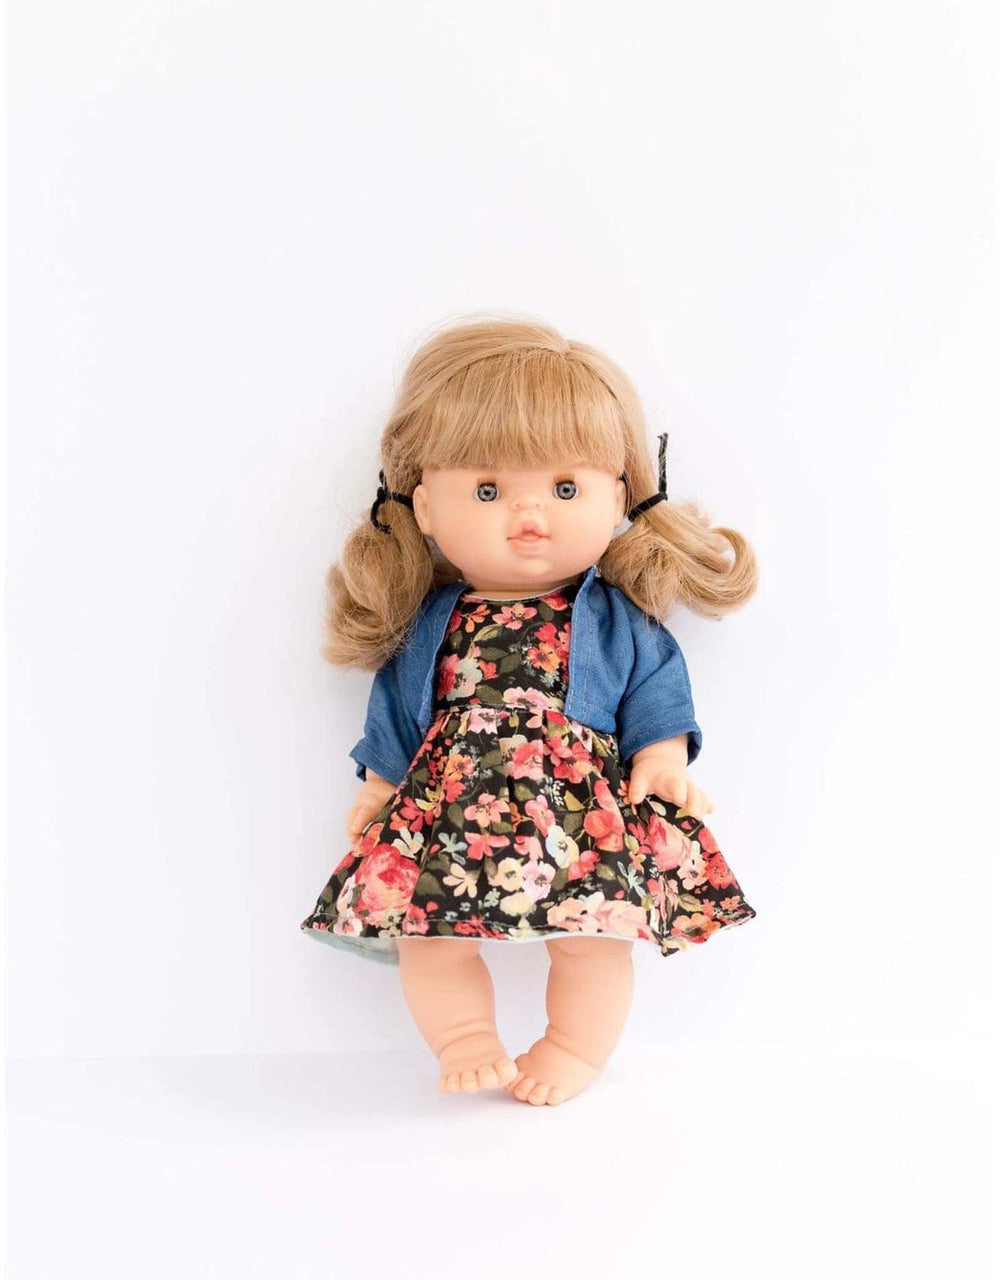 Floral Black Dress and Blue Jacket Gordis Doll Clothing Paola Reina Dolls Lil Tulips